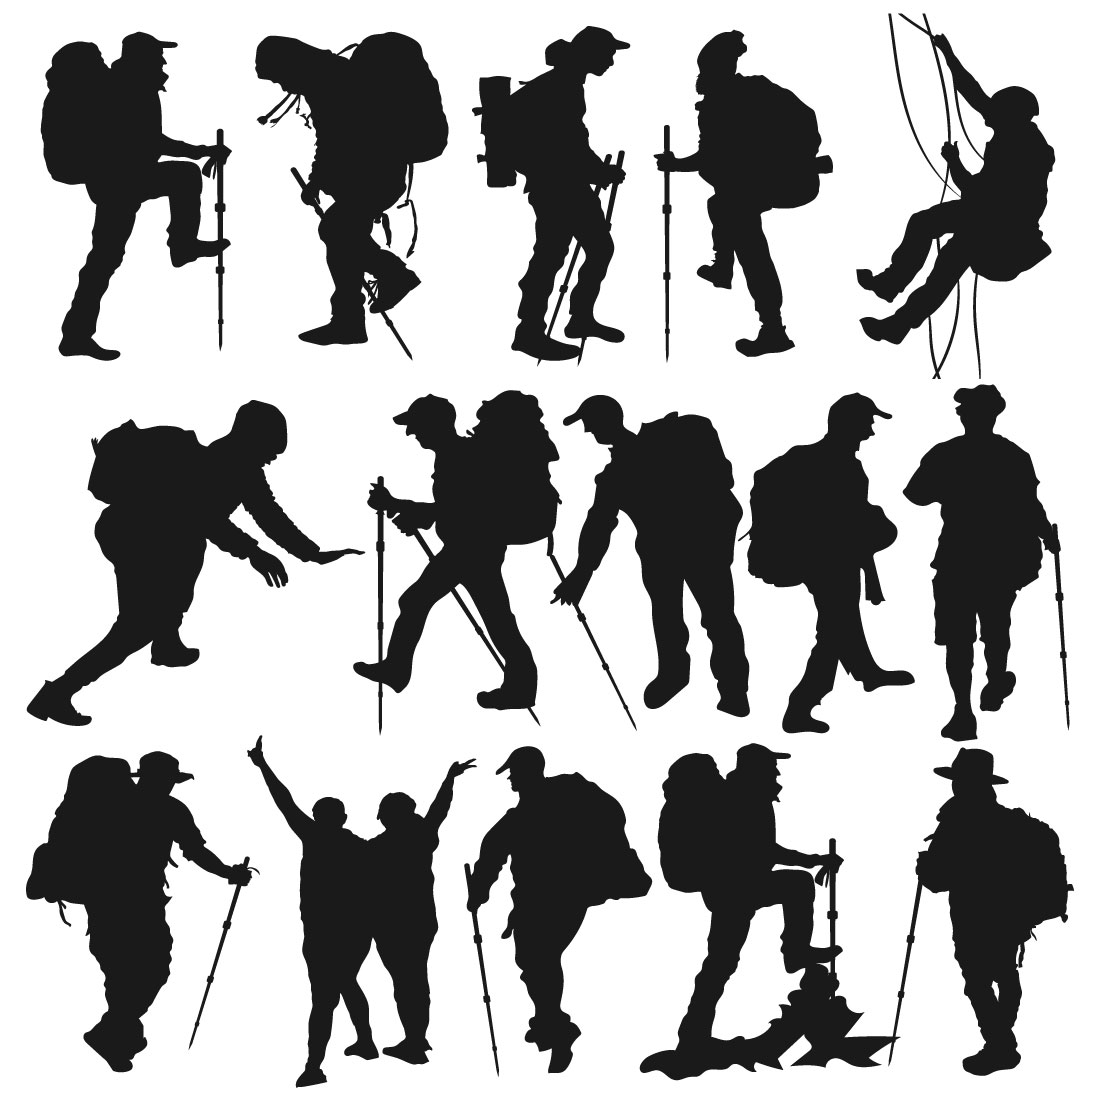 Climber hiker backpacker silhouette vector of a mountaineer cover image.